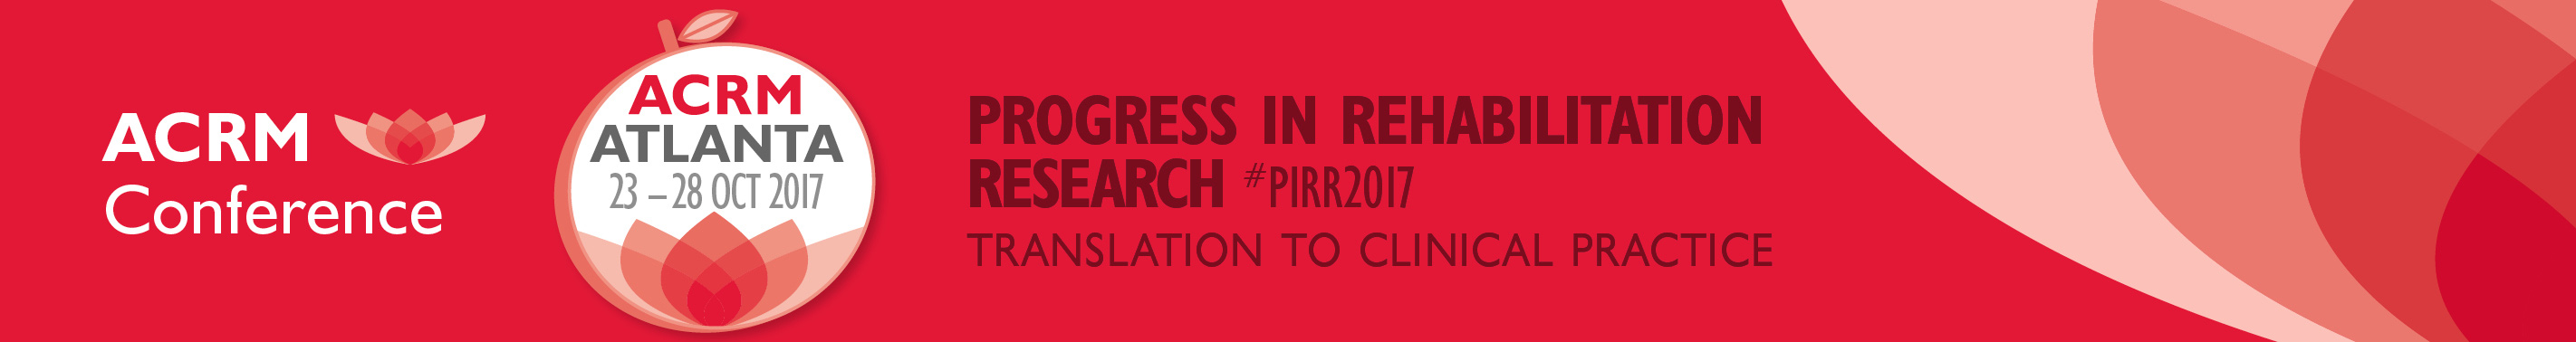 ACRM Conference: Progress in Rehabilitation Research #PIRR2017